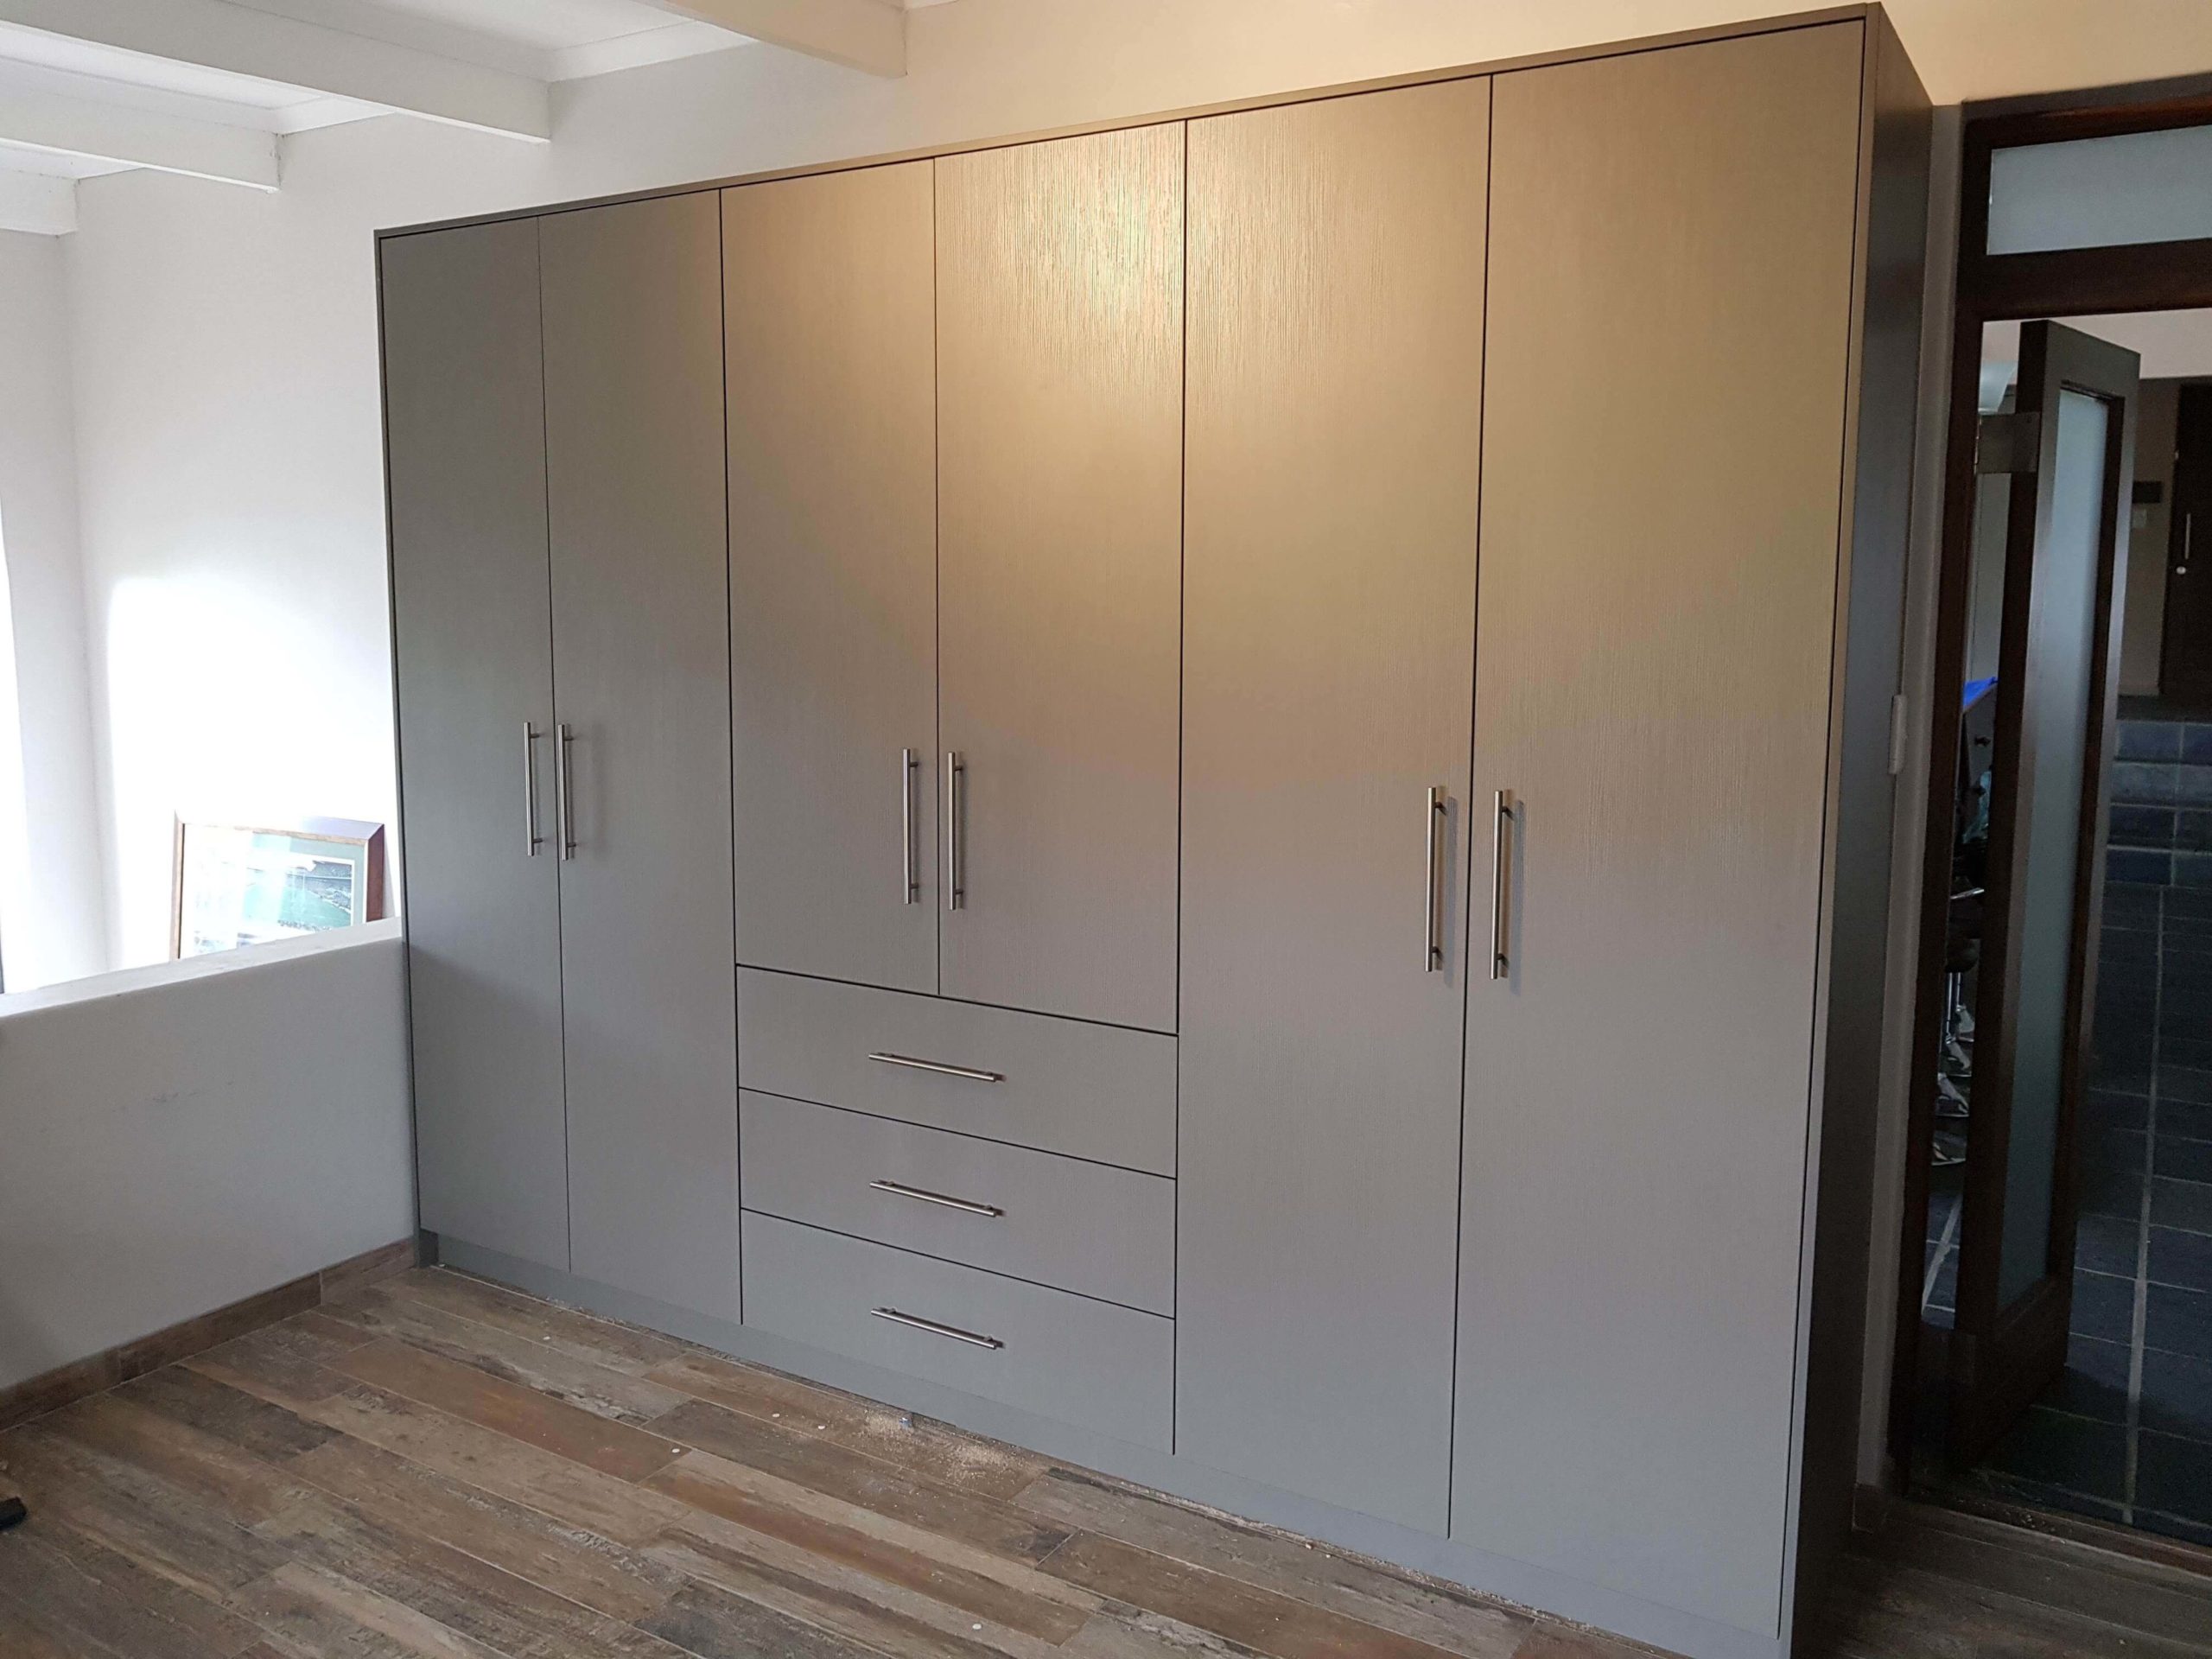 Bespoke Designs - 20180816 141513 scaled - kitchen renovation,cabinetry,custom cabinetry,built in cupboard,Bespoke Designs